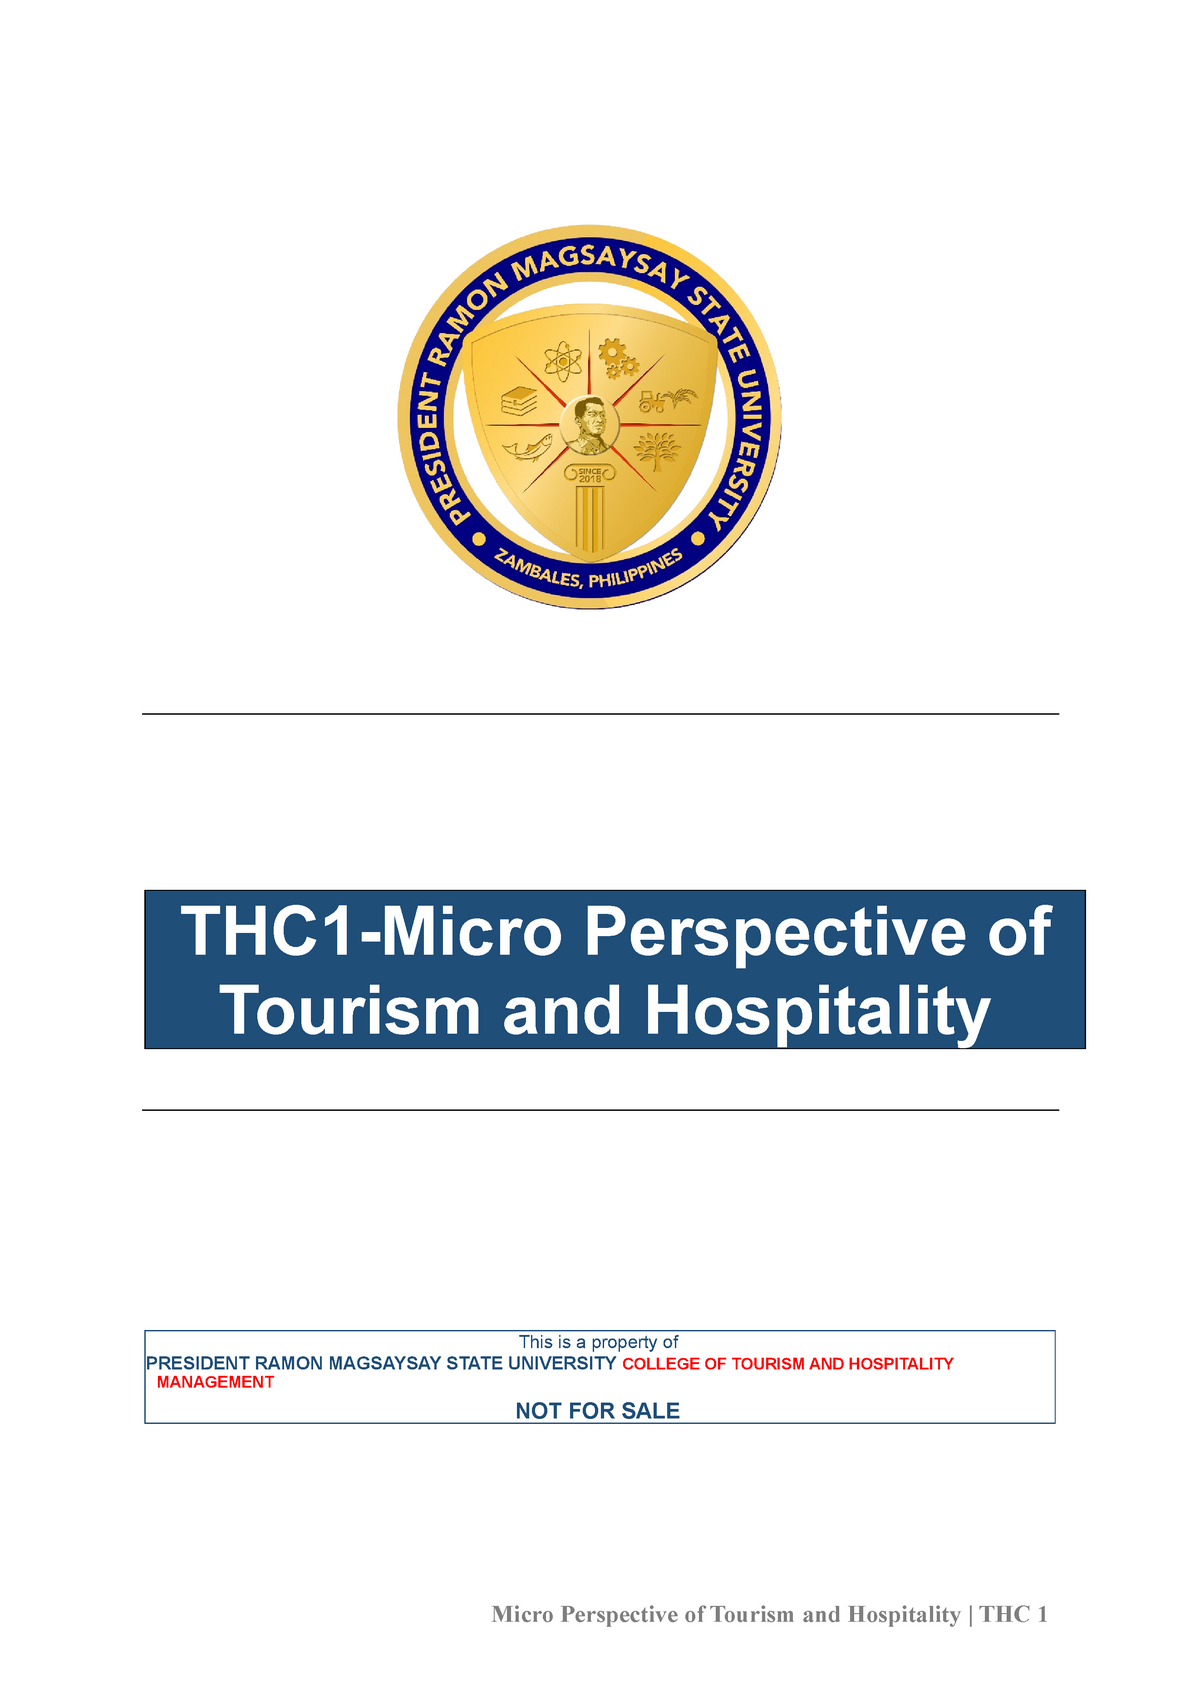 history of tourism and hospitality essay